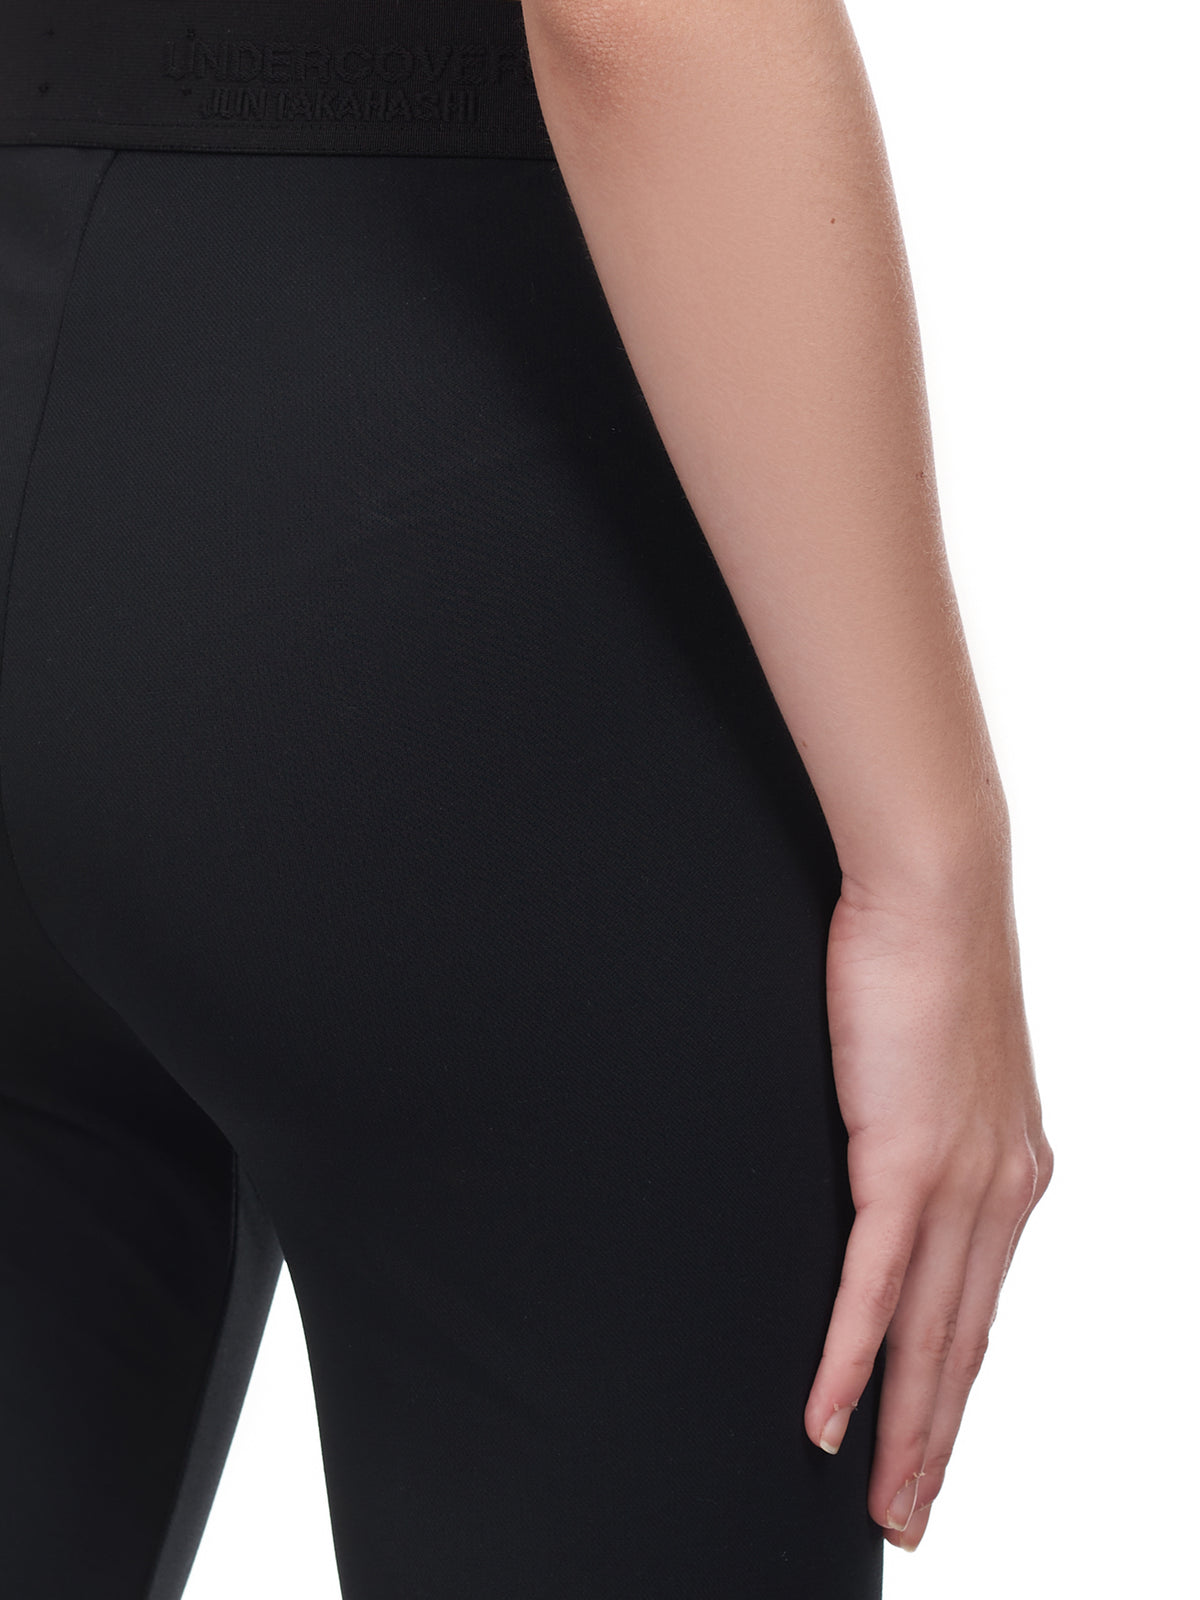 Undercover Fitted Leggings | H. Lorenzo - detail 2